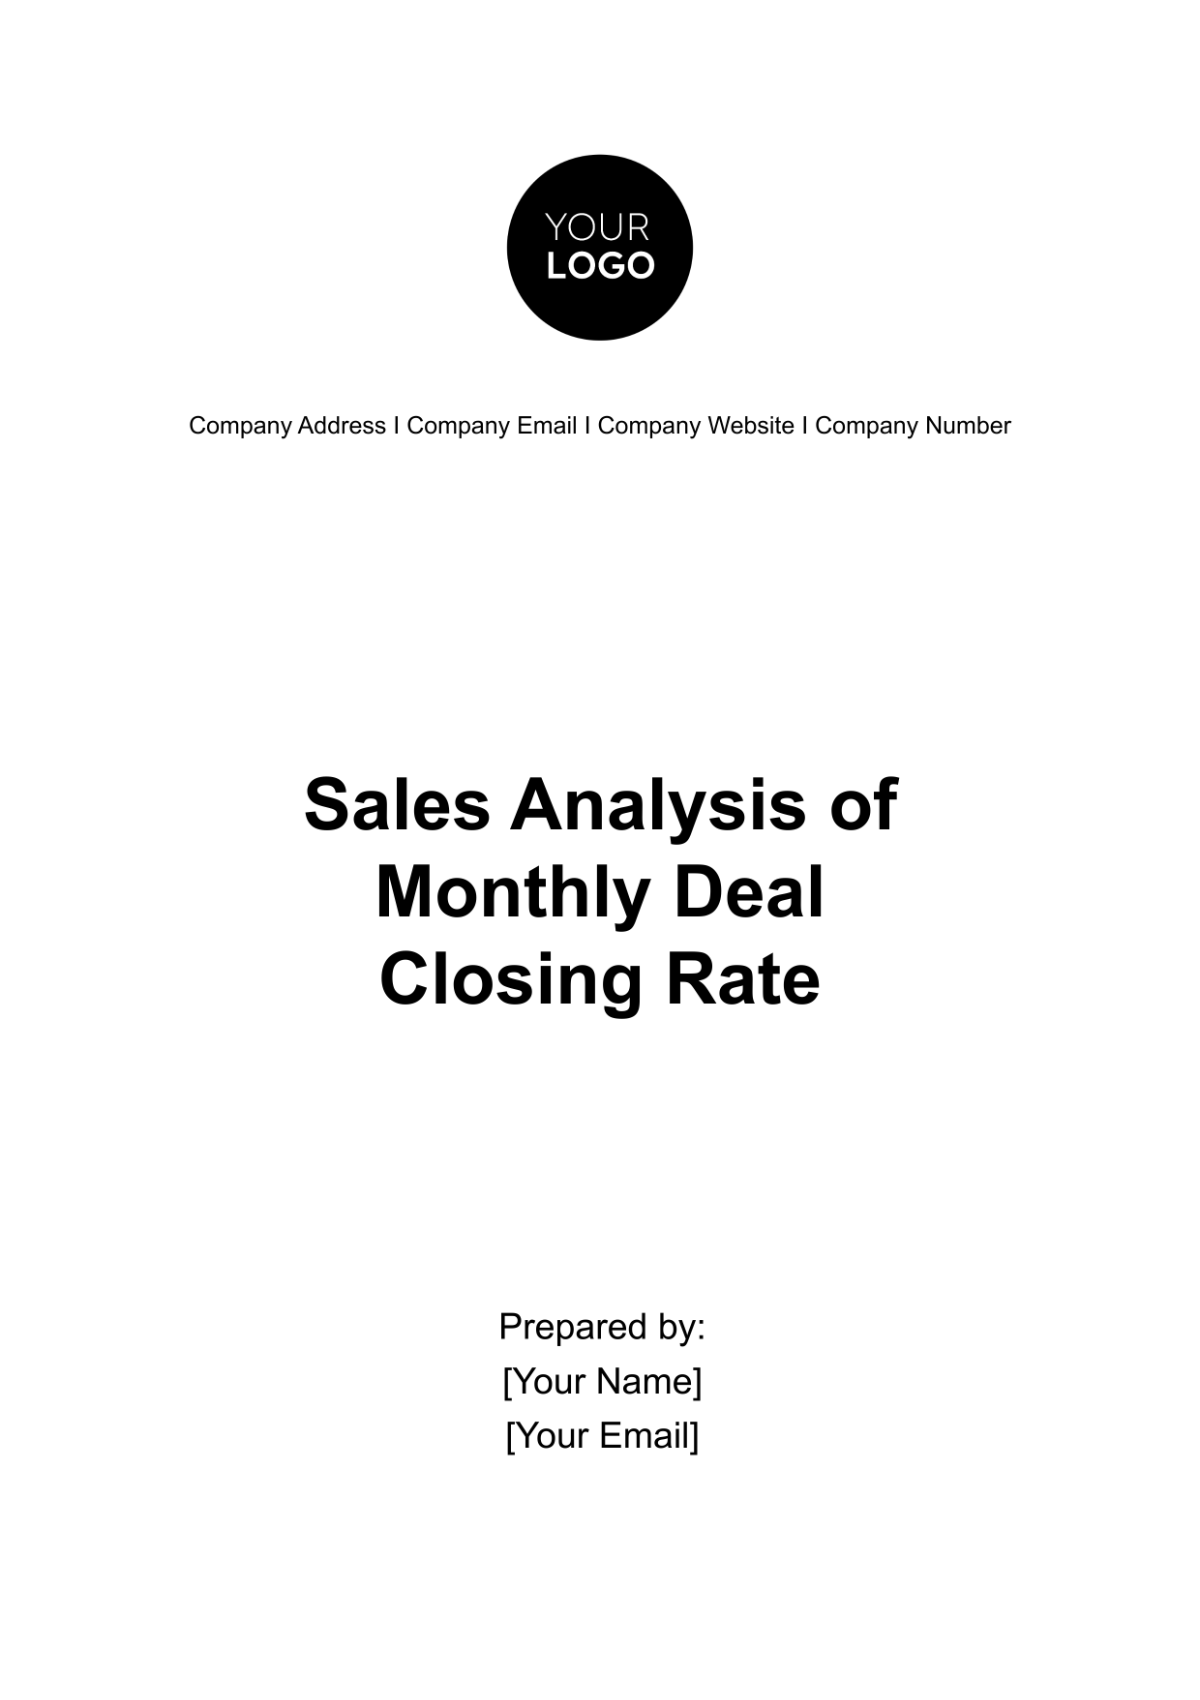 Sales Analysis of Monthly Deal Closing Rate Template